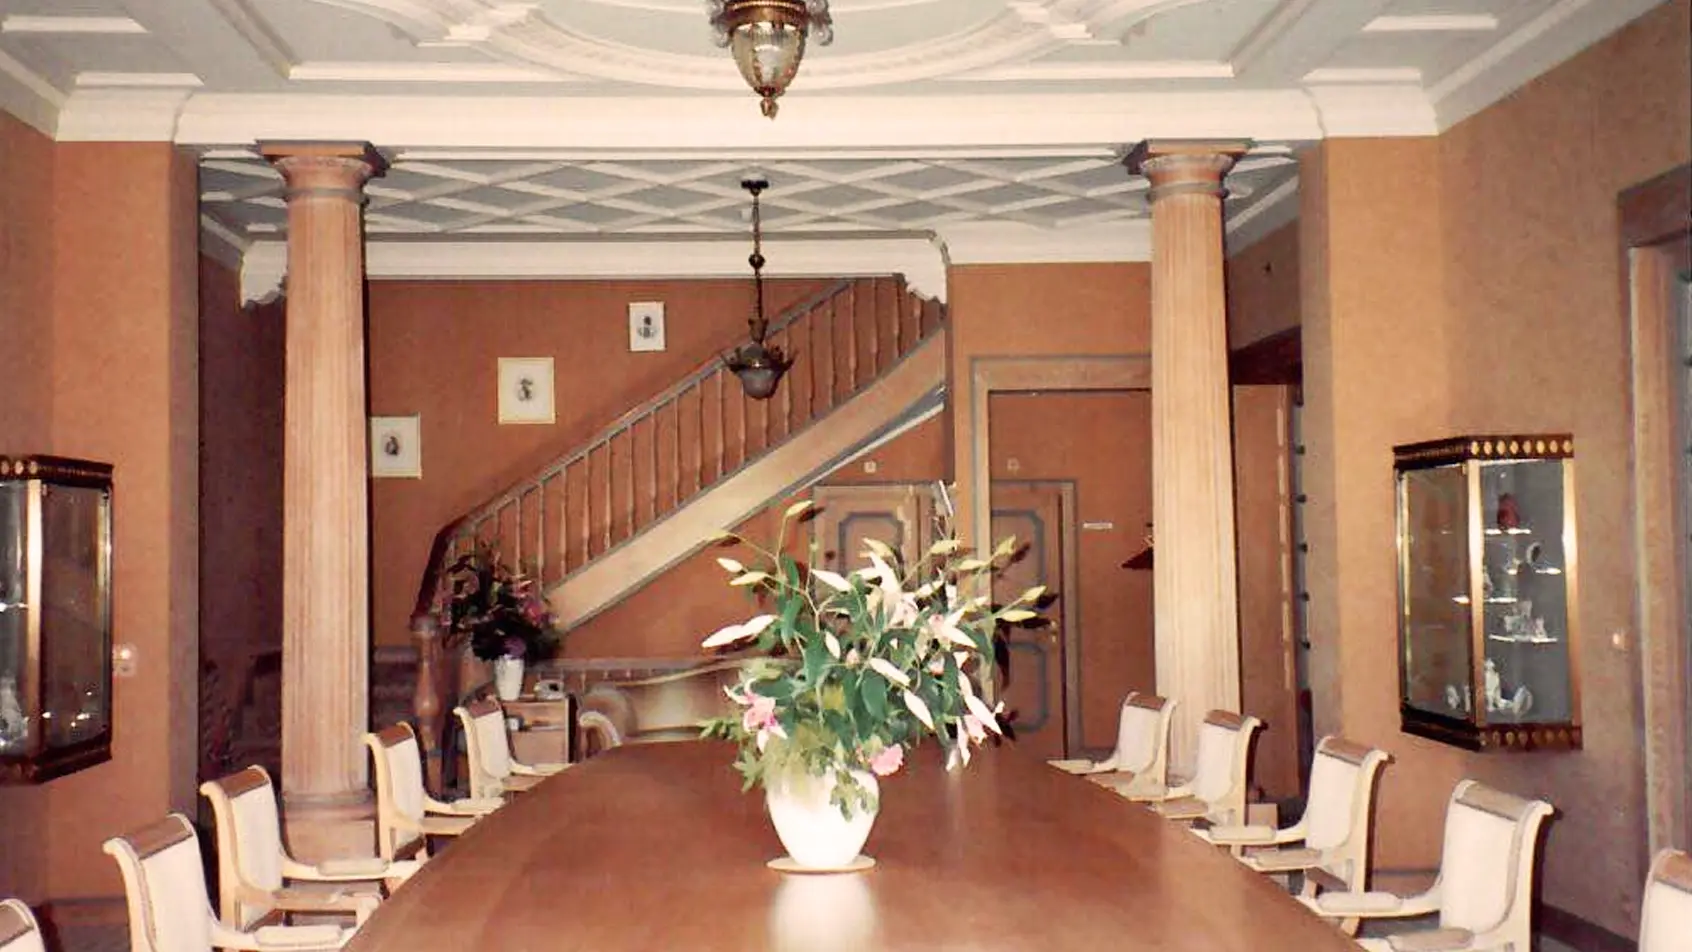 In 1980, Villa Ernst was remodeled to accommodate the new Jacobs Suchard Museum. During this process, most of its unique character was eliminated in favor of a more conventional, elegant look. 